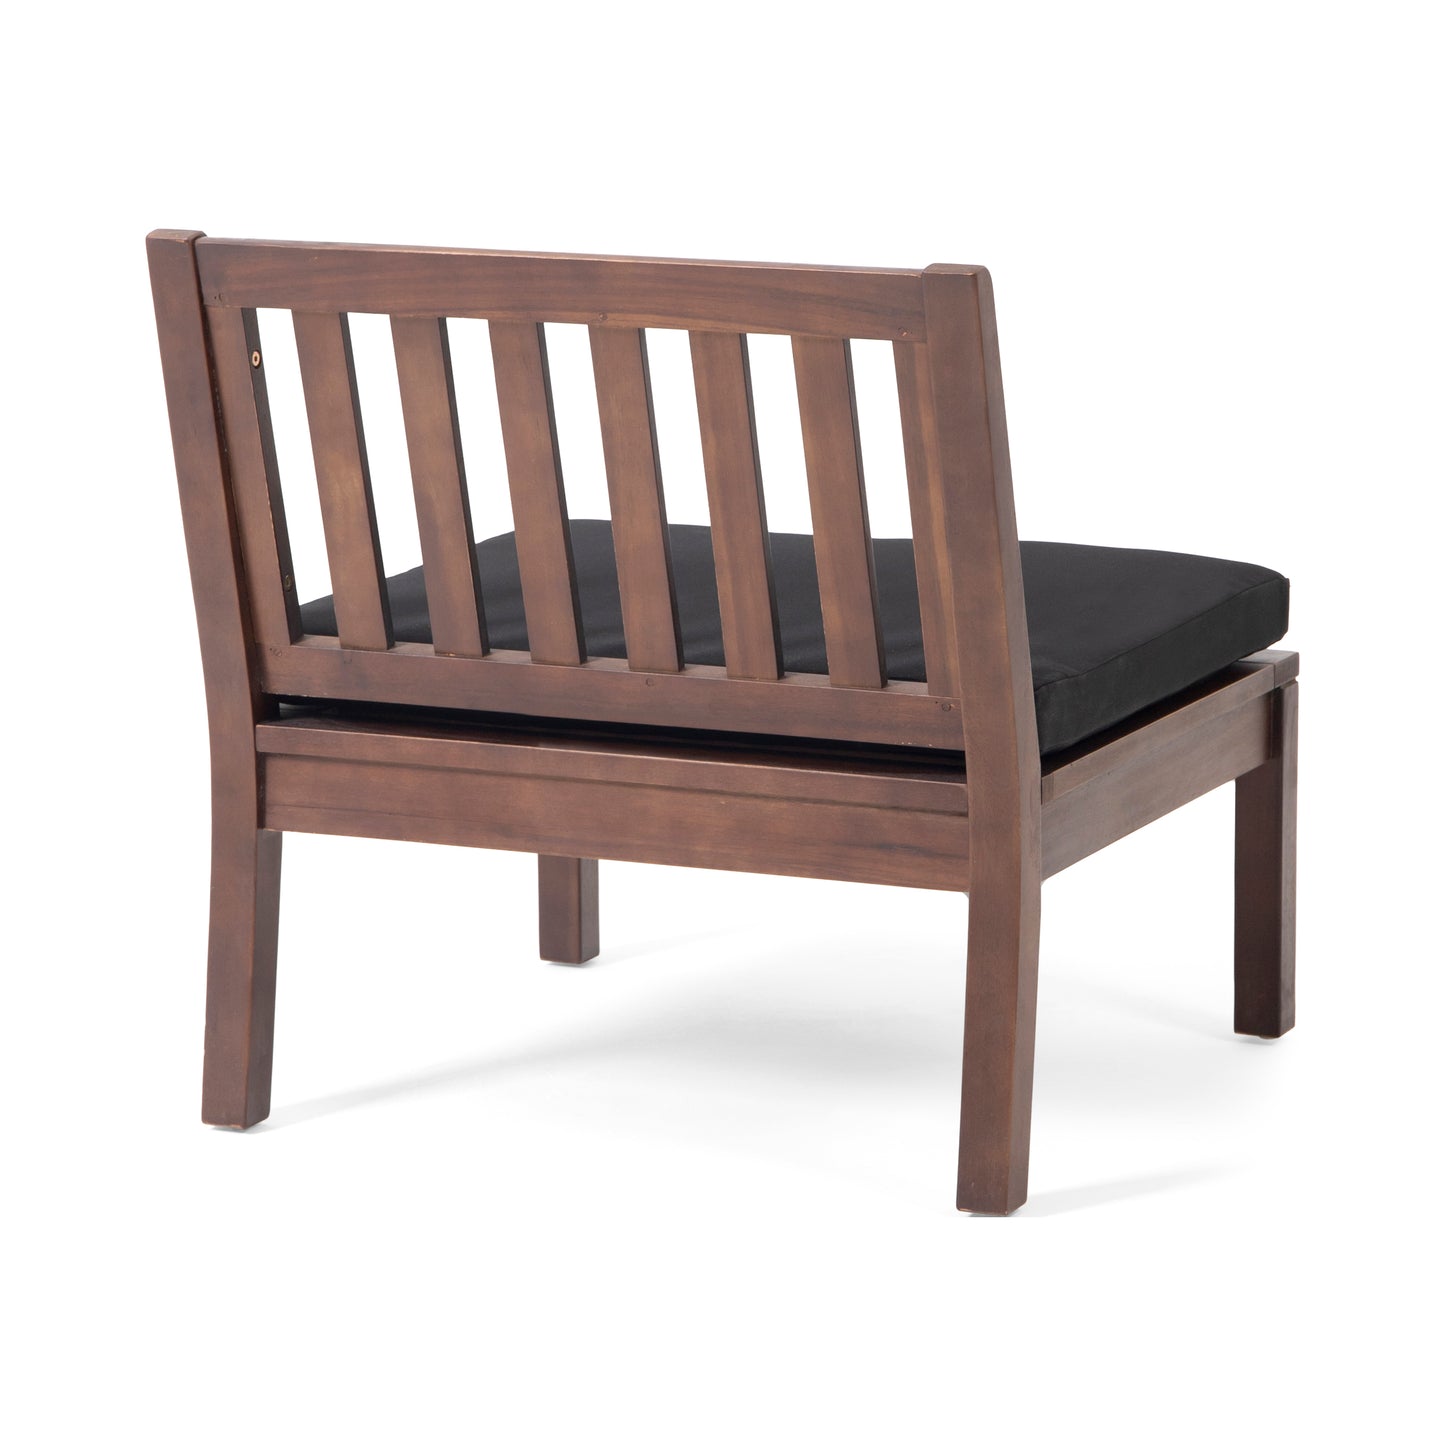 Arth Outdoor Acacia Wood Chat Set with Coffee Table